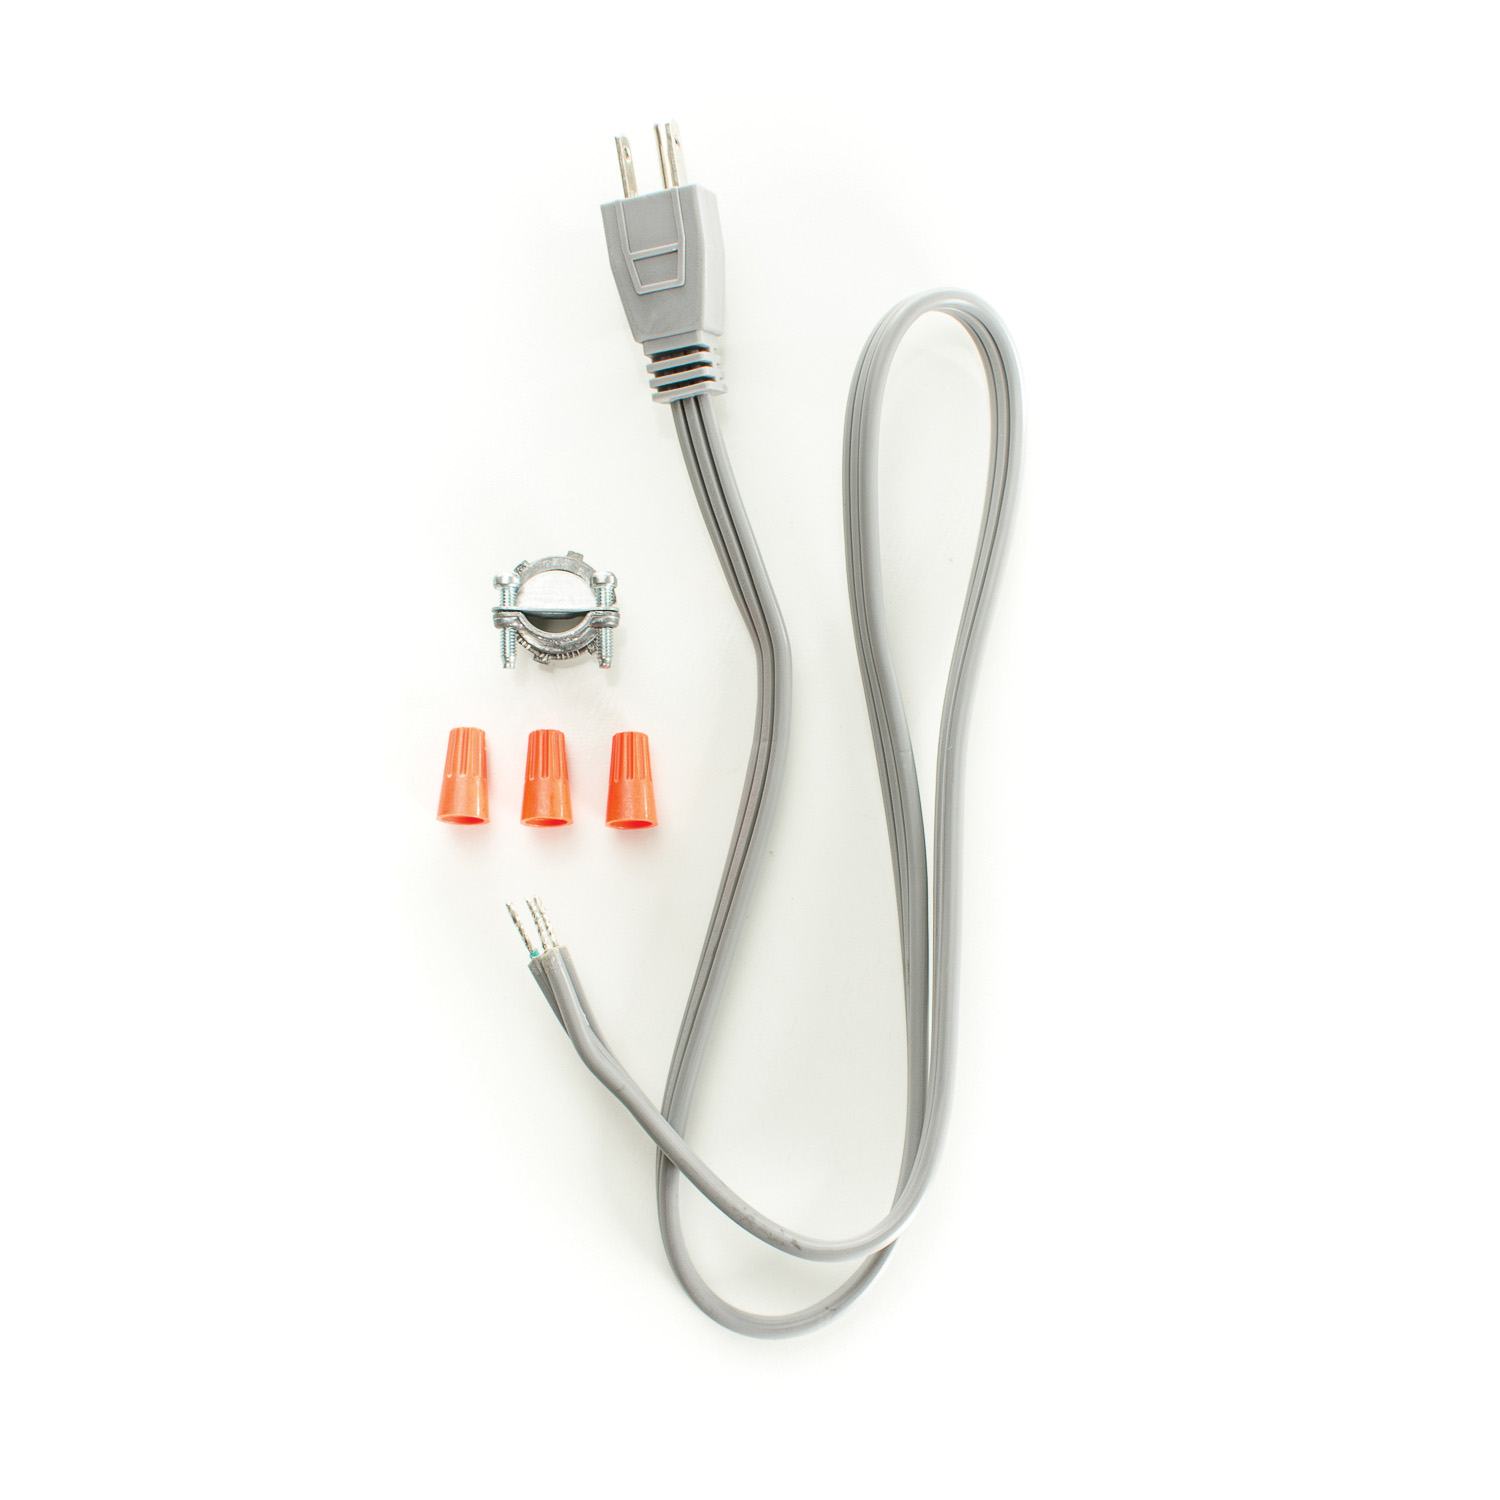 PASCO 8130 SPT Disposal Cord, 3 ft L, 13 A, Romex Pigtail Connector